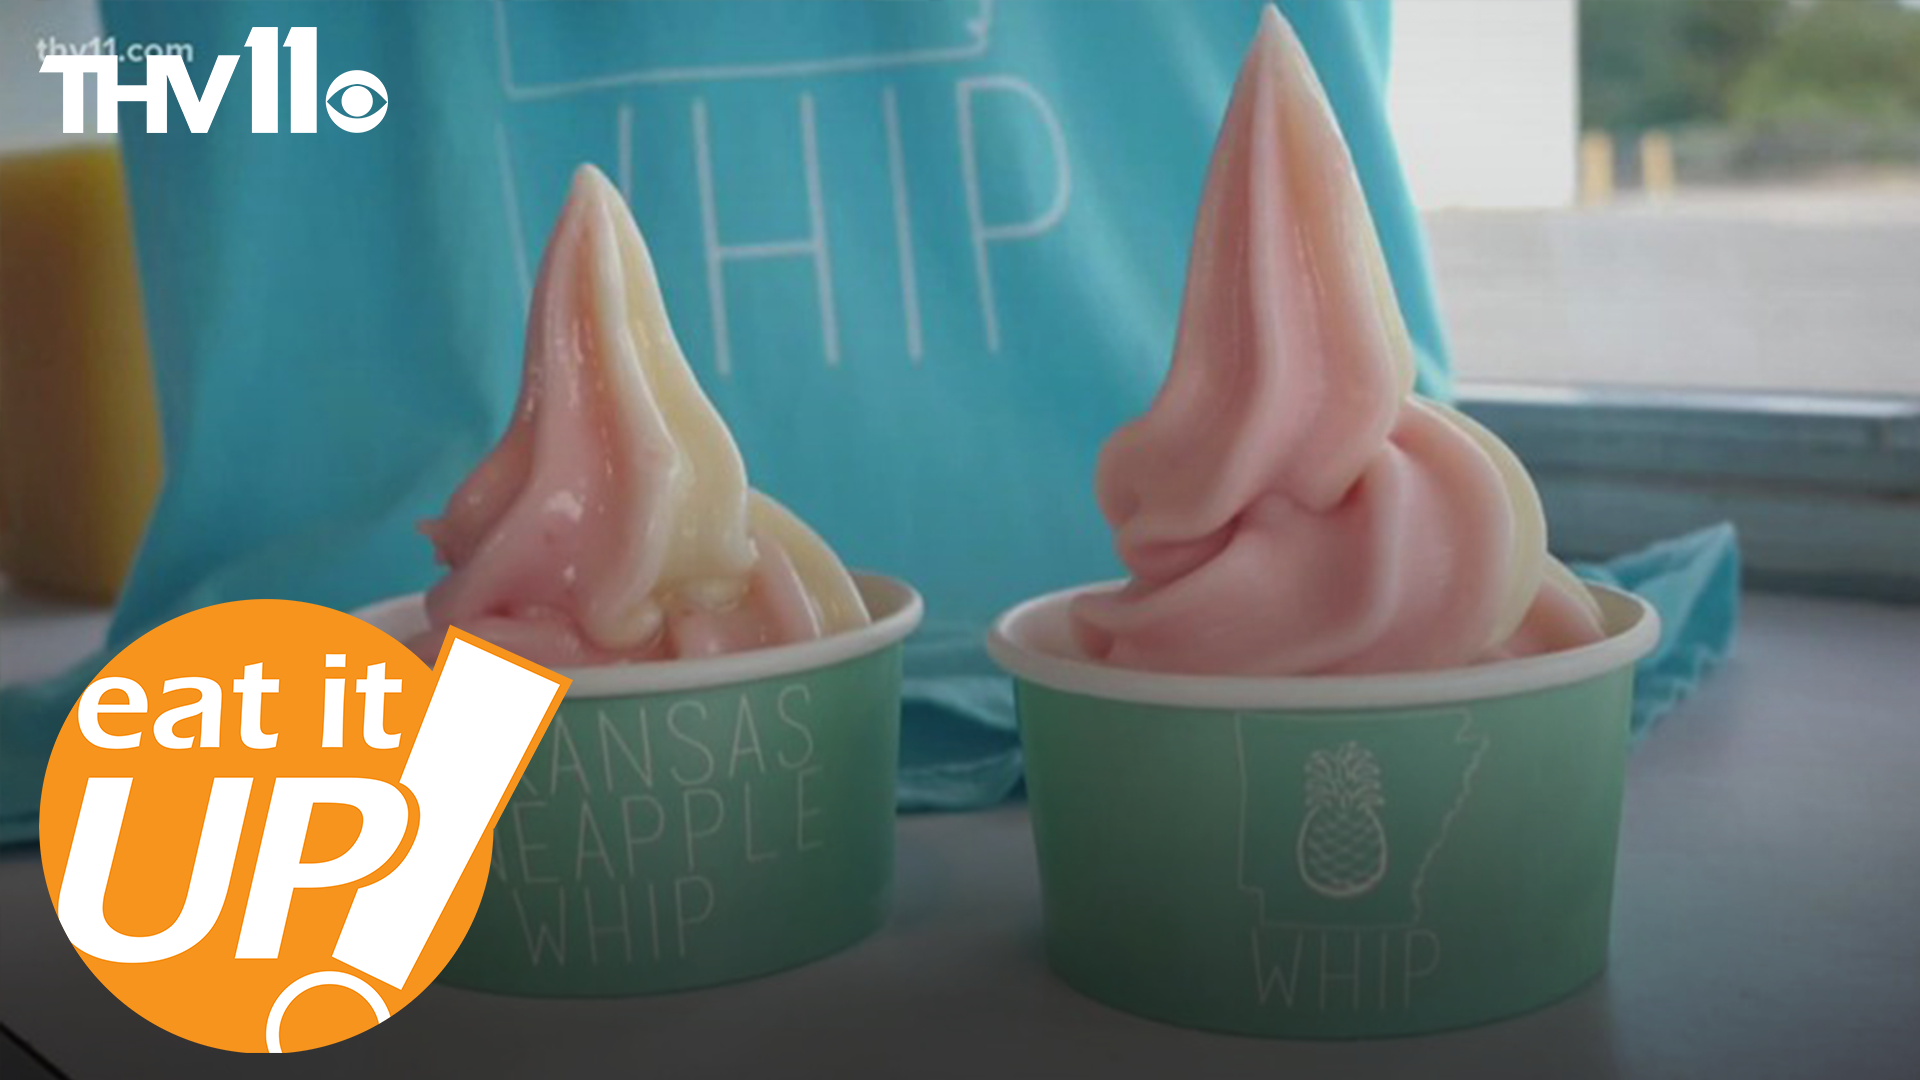 While Arkansas Pineapple Whip resembles the classic, their original recipes make it totally unique and tasty in its own unique way. Plus, it's dairy free!